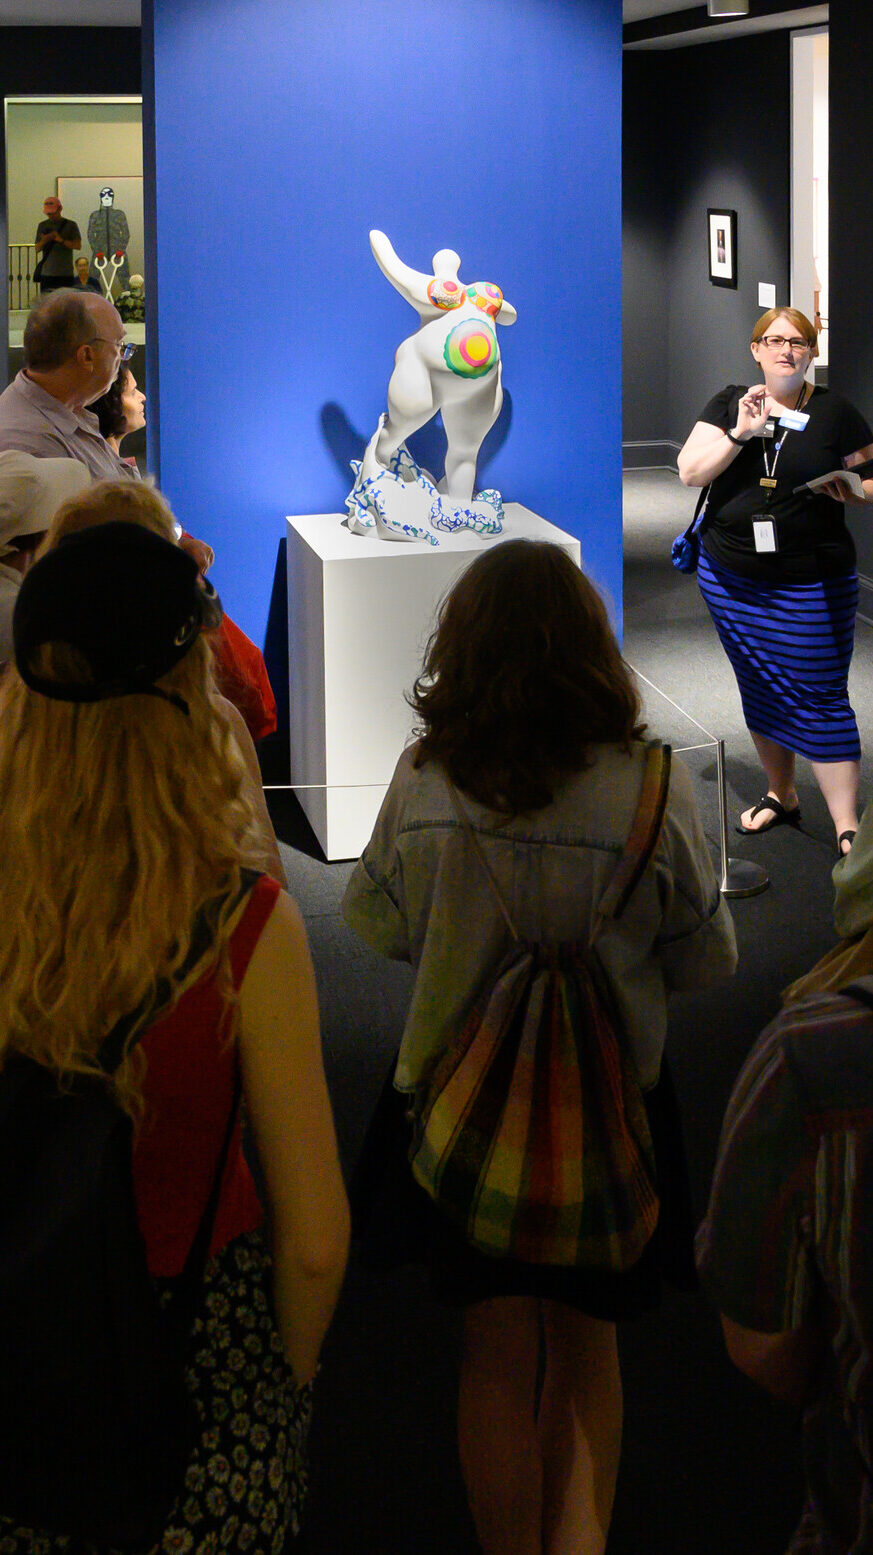 A light-skinned museum docent discusses a white marble sculpture of a female figure covered in bright patterns with visitors in the gallery.